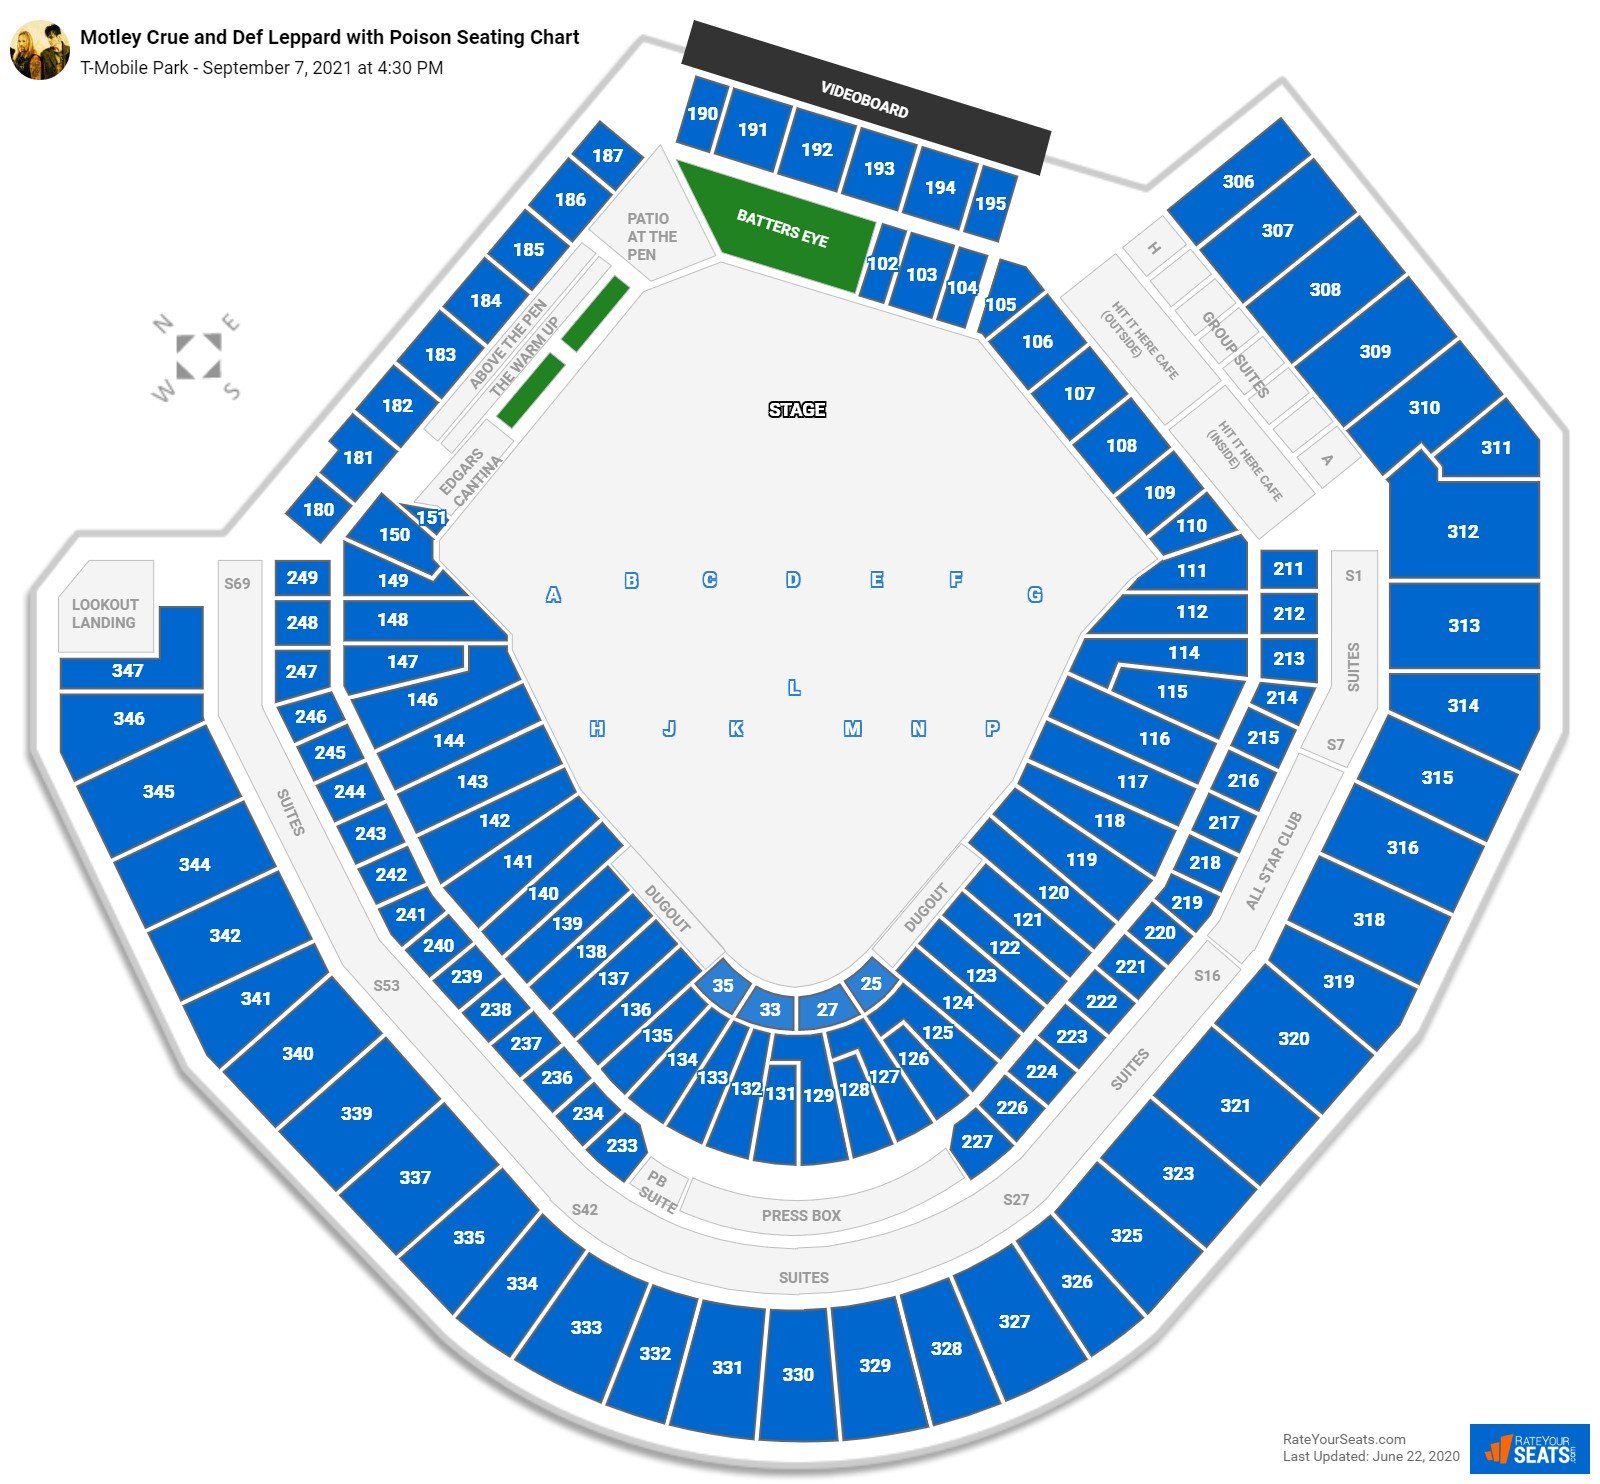 TMobile Park Seating Charts for Concerts